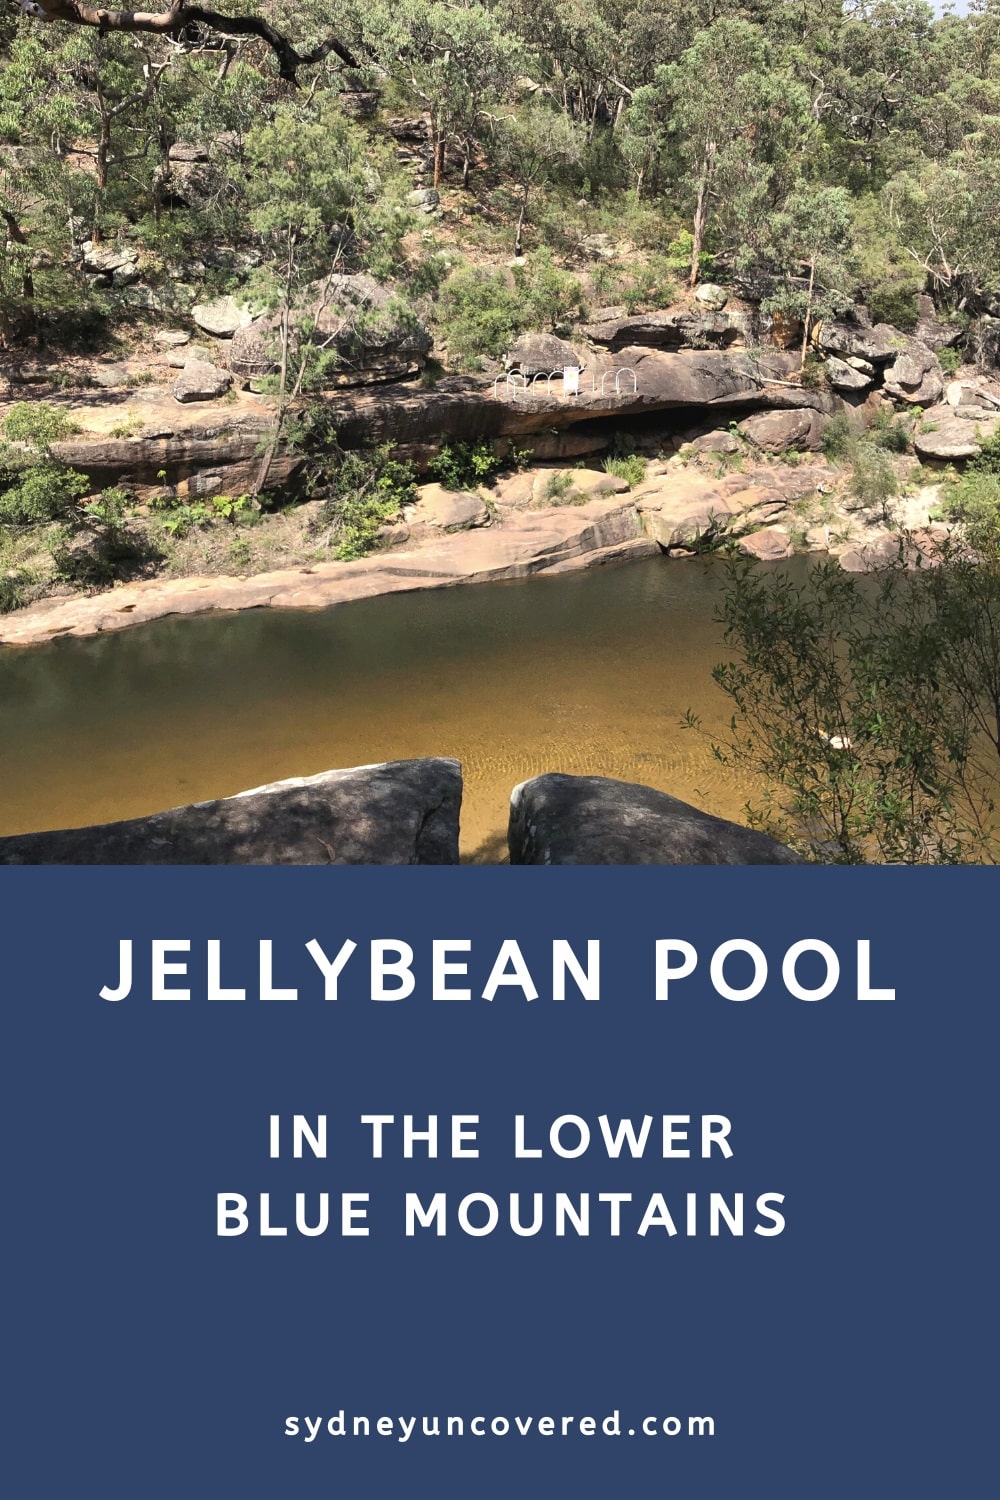 Jellybean Pool in the Lower Blue Mountains